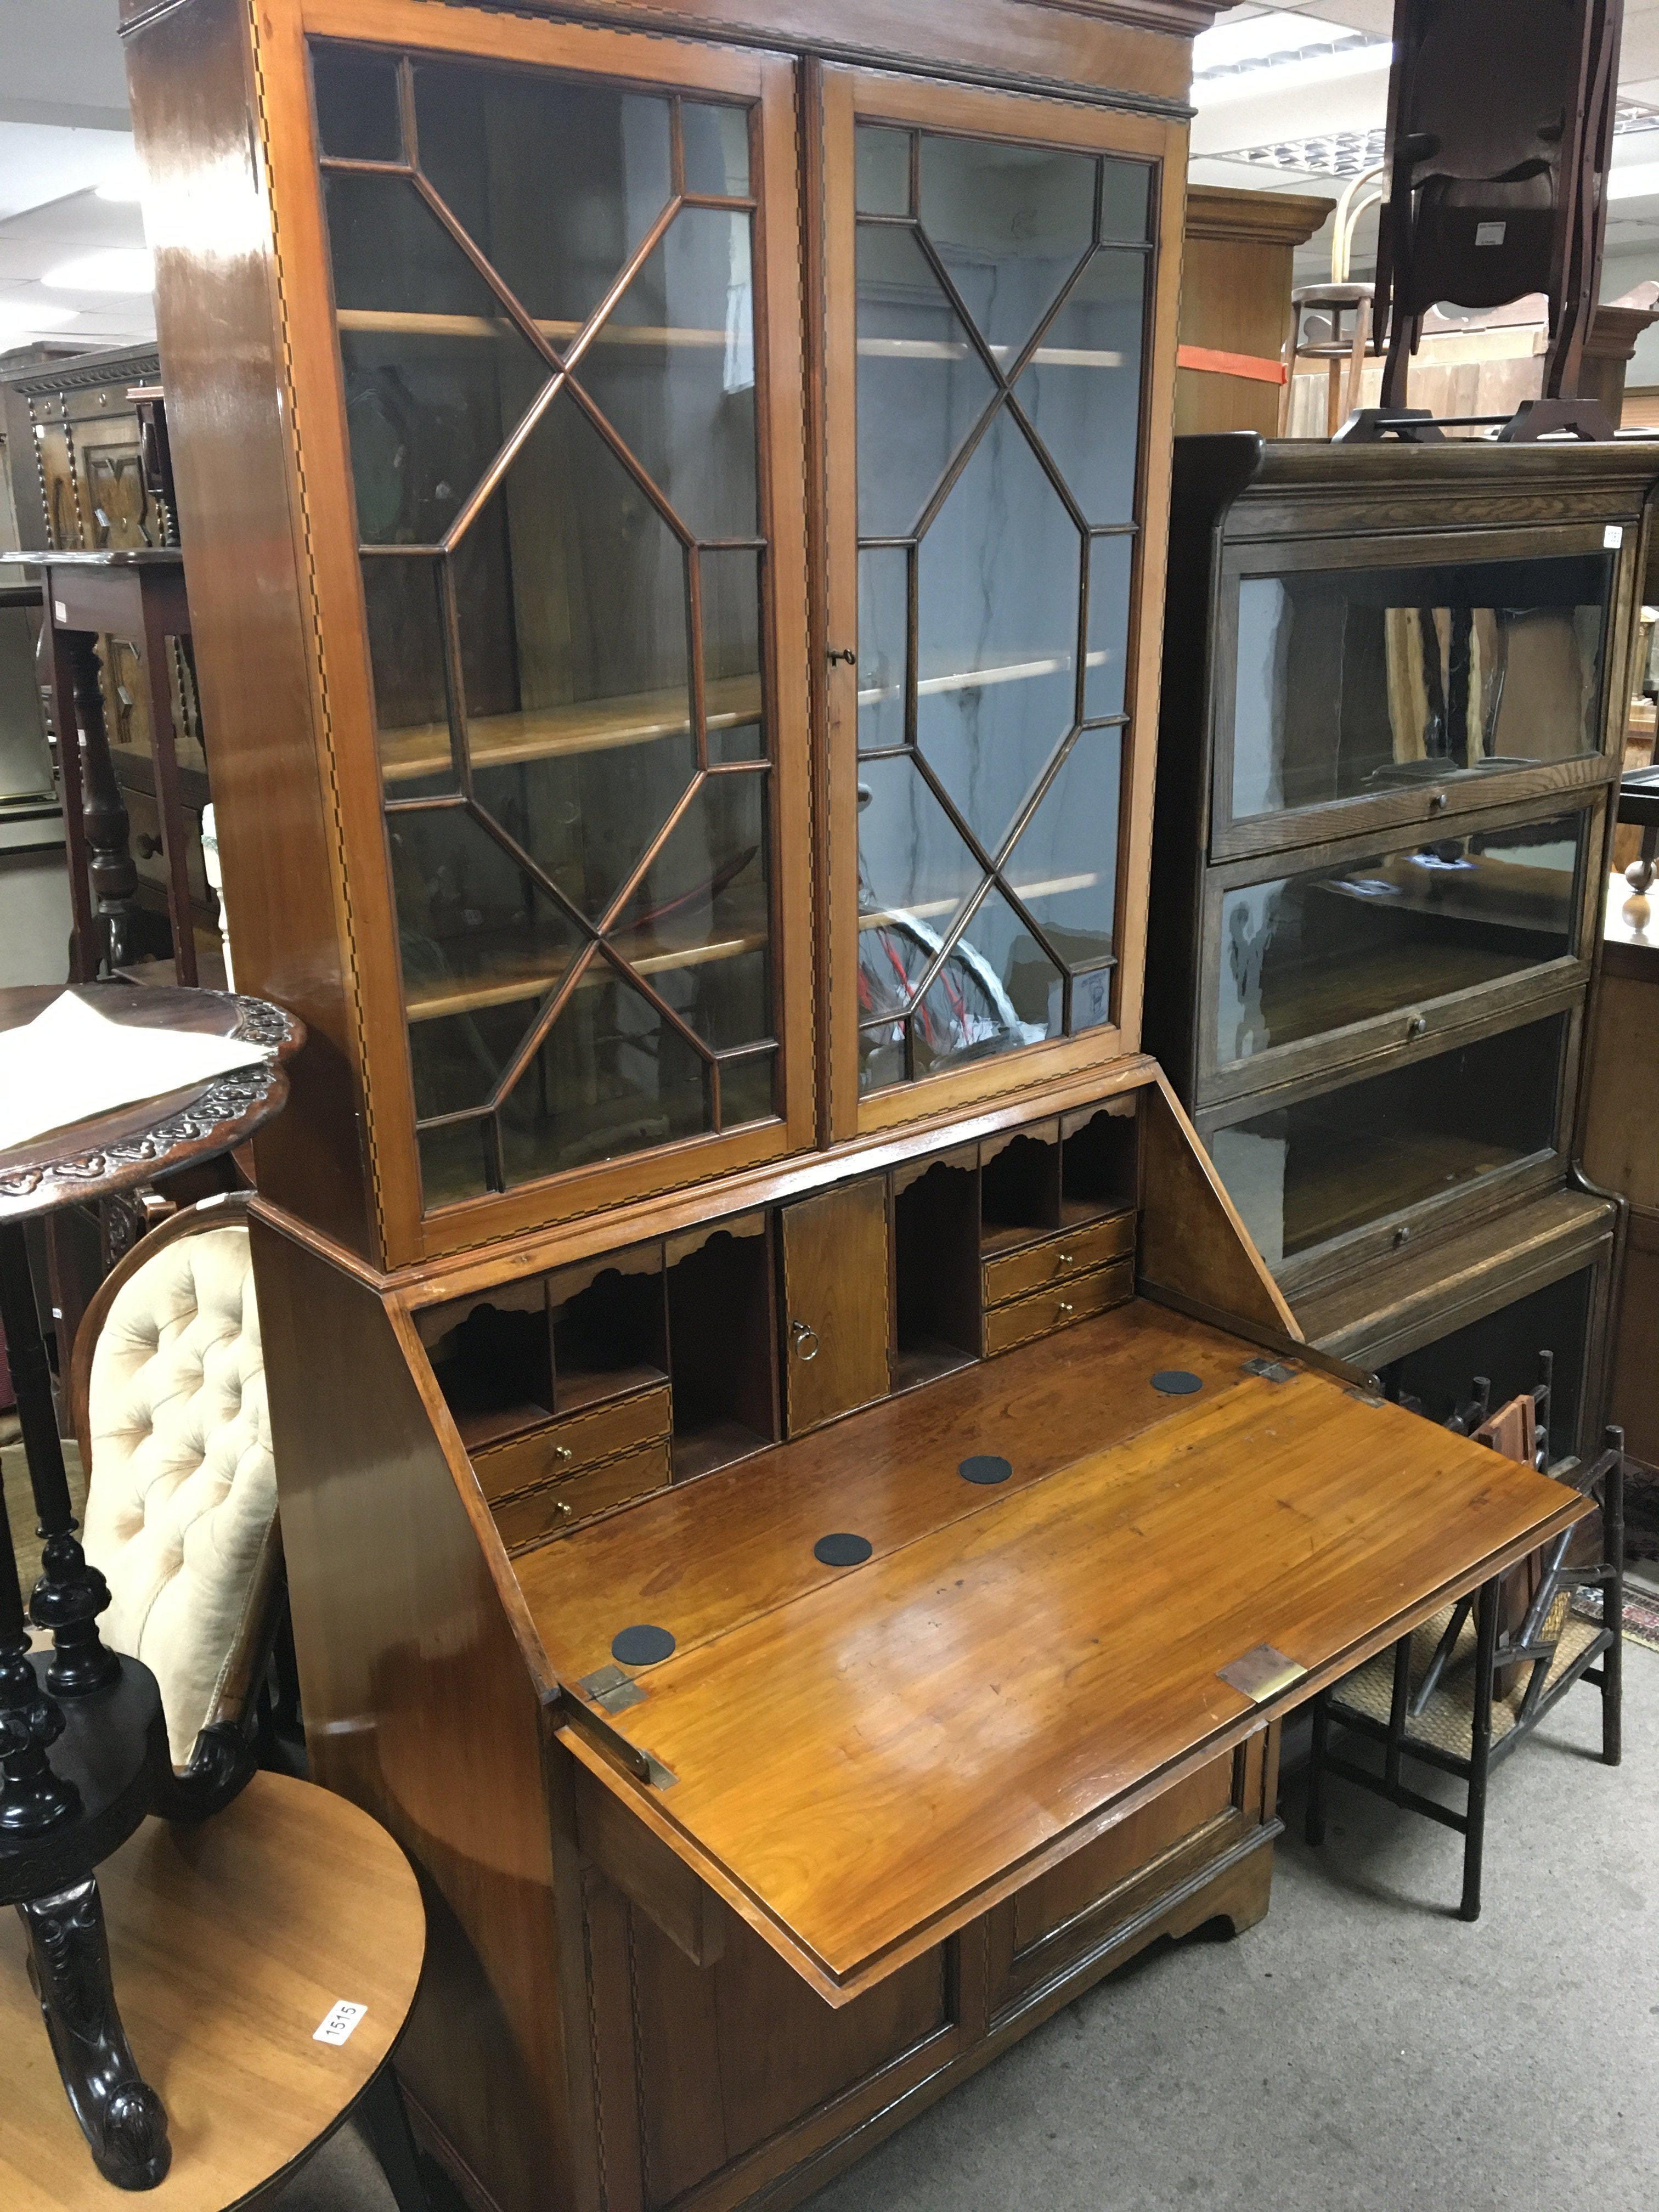 An Edwardian inlaid walnut bureau bookcase with glazed doors above a well fitted interior.